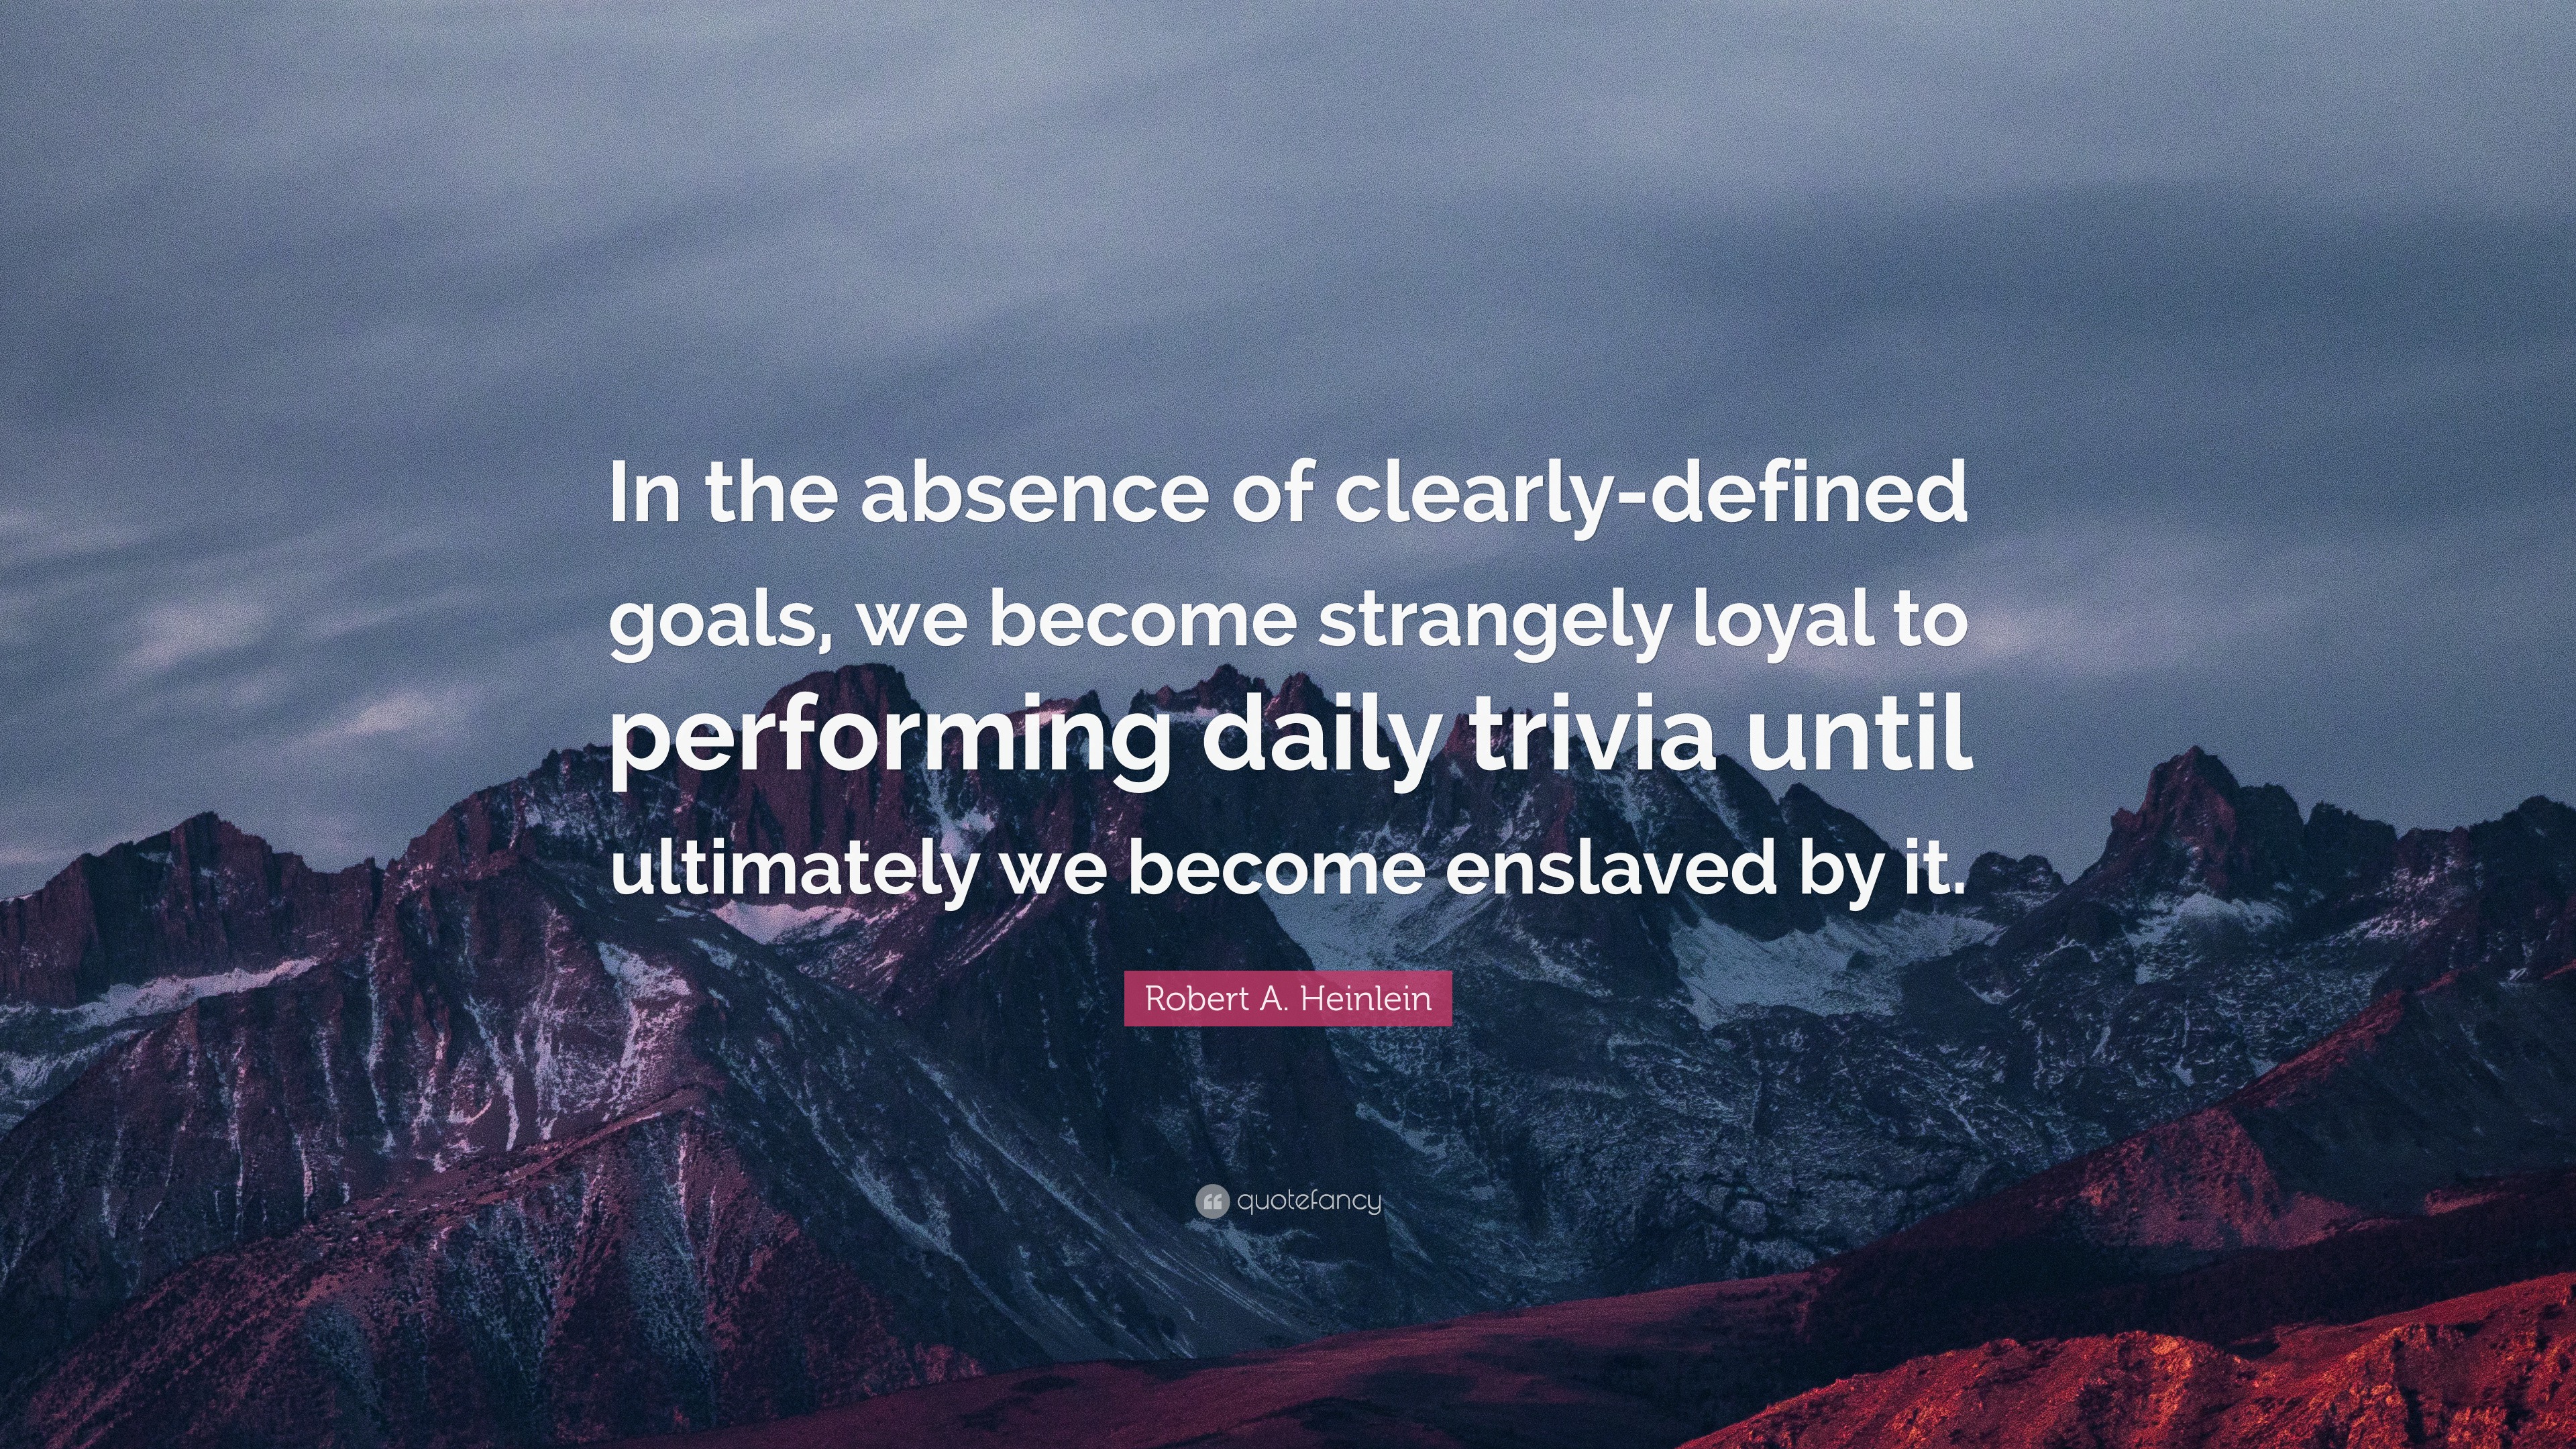 Robert A Heinlein Quote In The Absence Of Clearly Defined Goals We Become Strangely Loyal To Performing Daily Trivia Until Ultimately We Become 9 Wallpapers Quotefancy